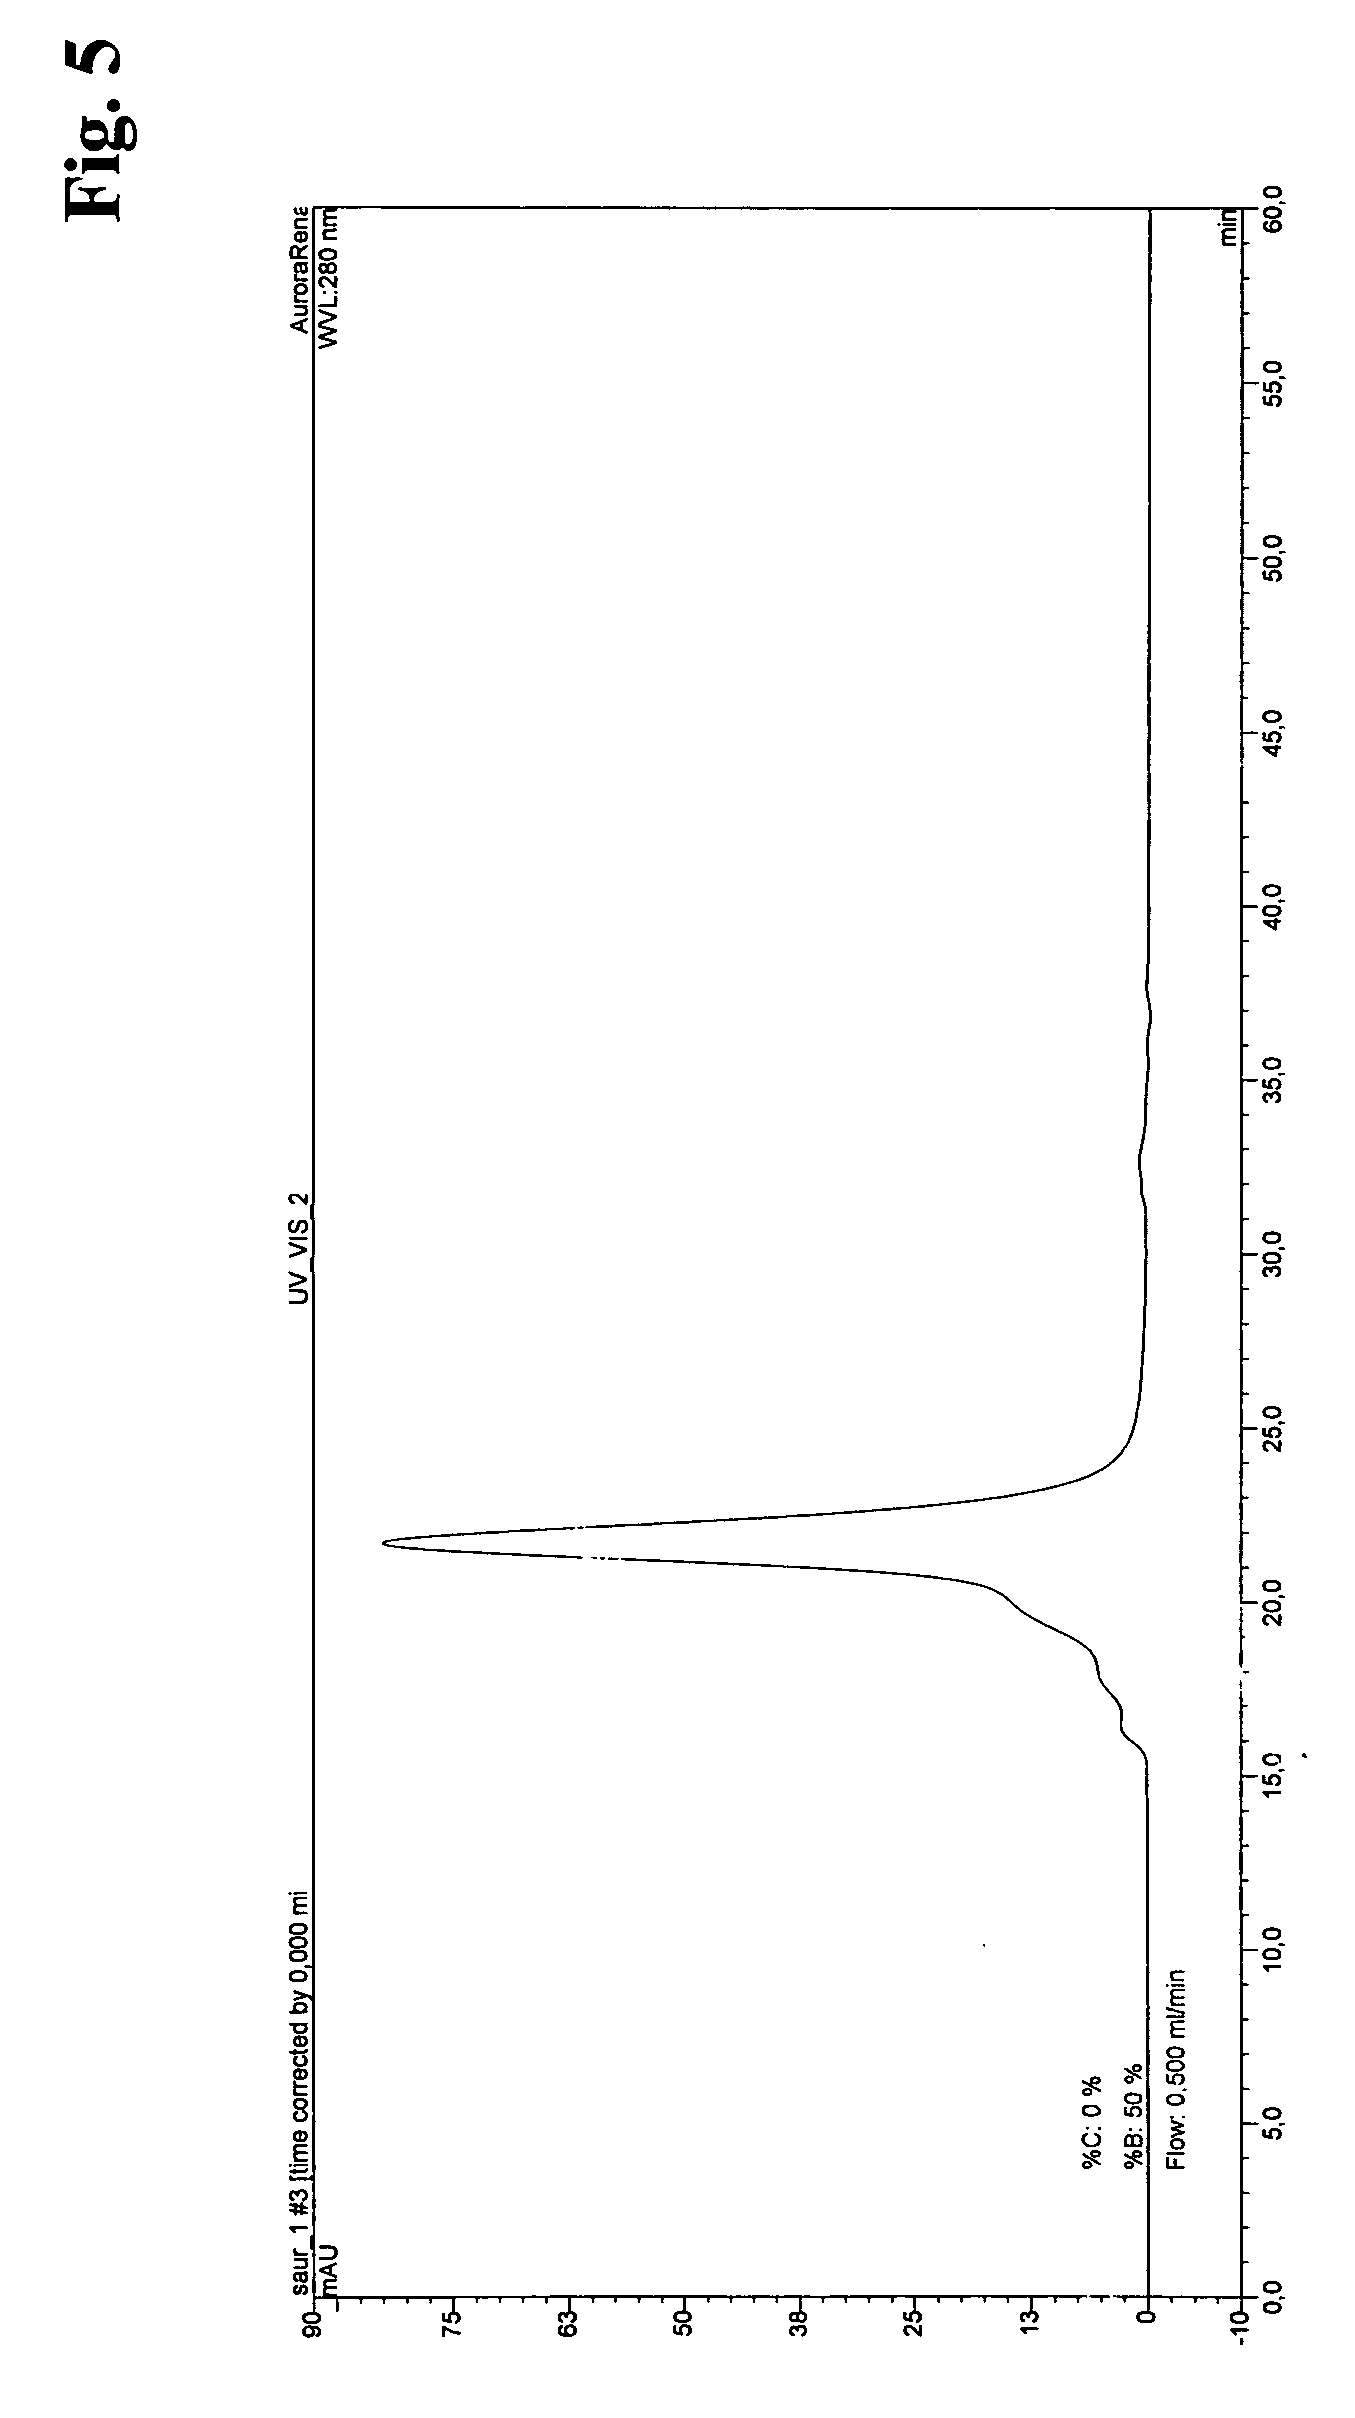 Method for the recombinant production and purification of protein kinases